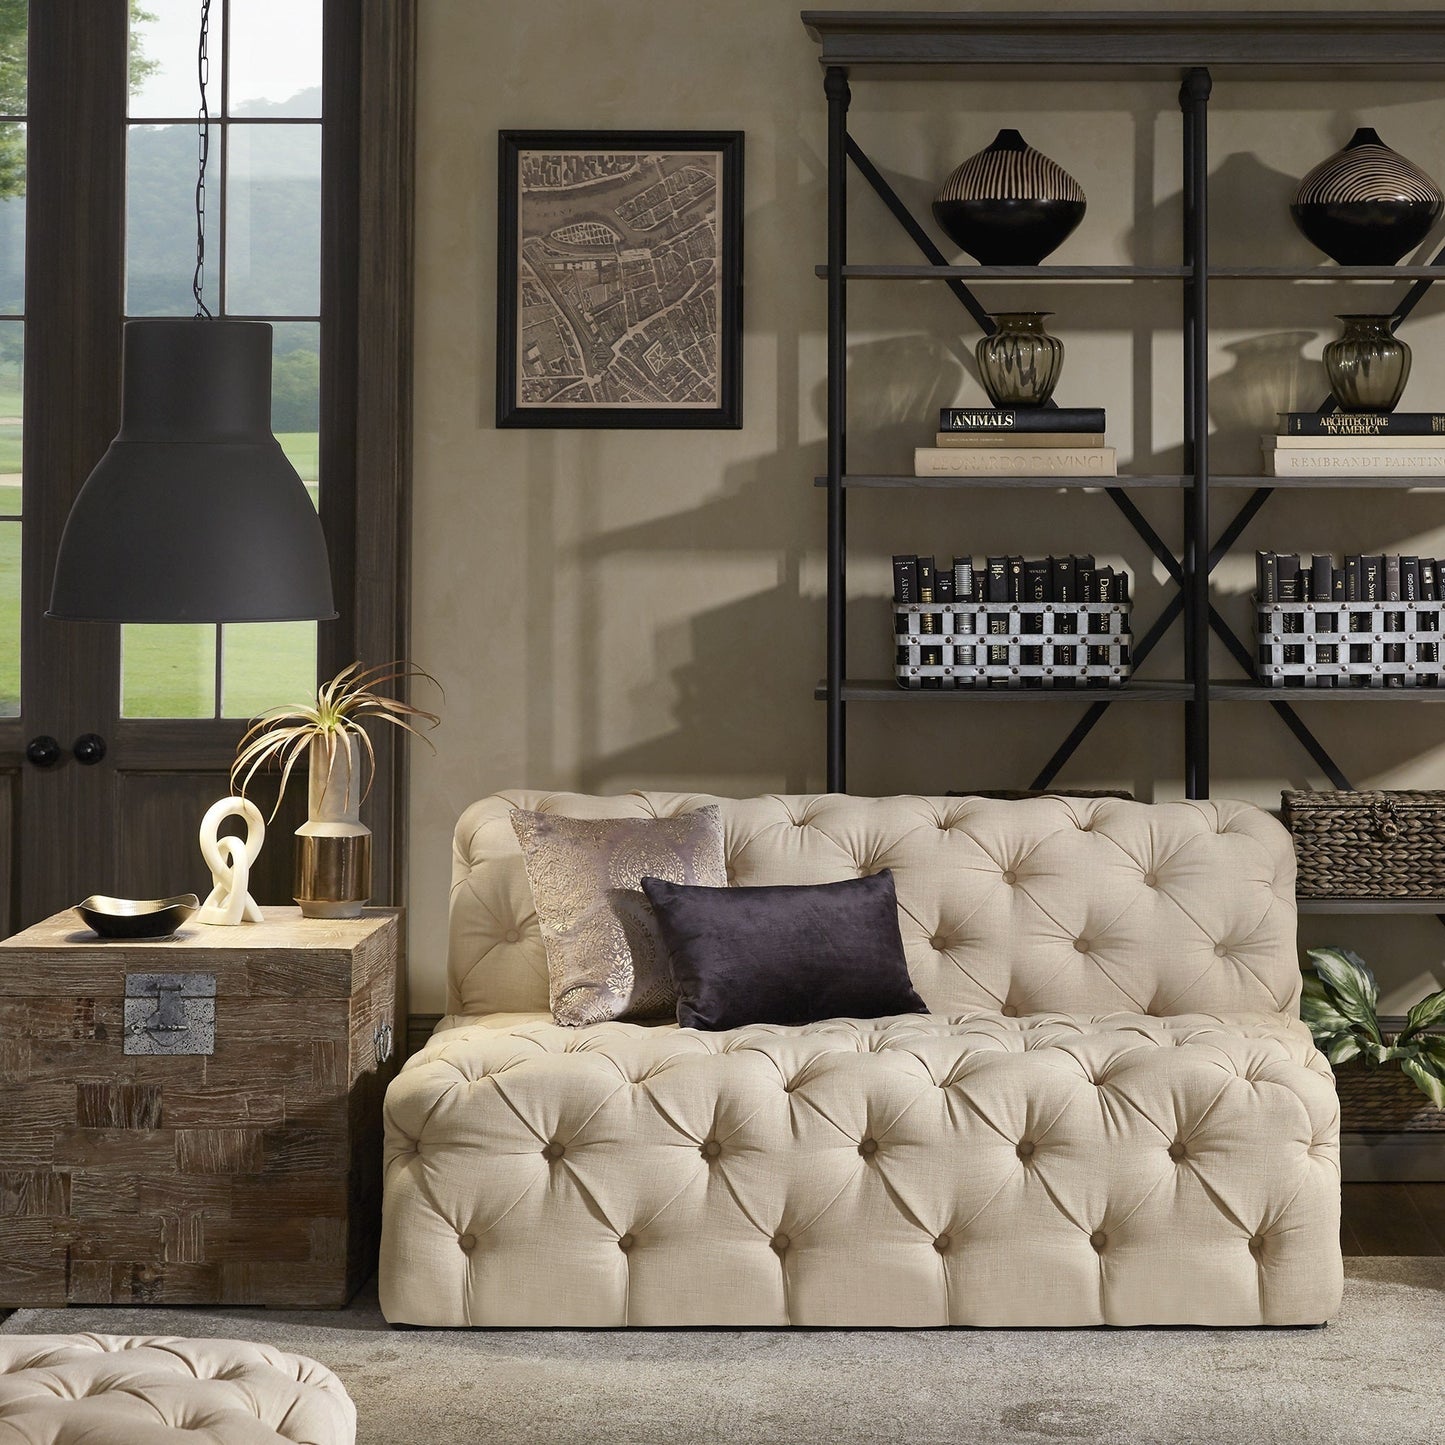 Beige Linen Tufted Chesterfield Modular Sectional - 4-Seat, U-Shaped Chaise Sectional